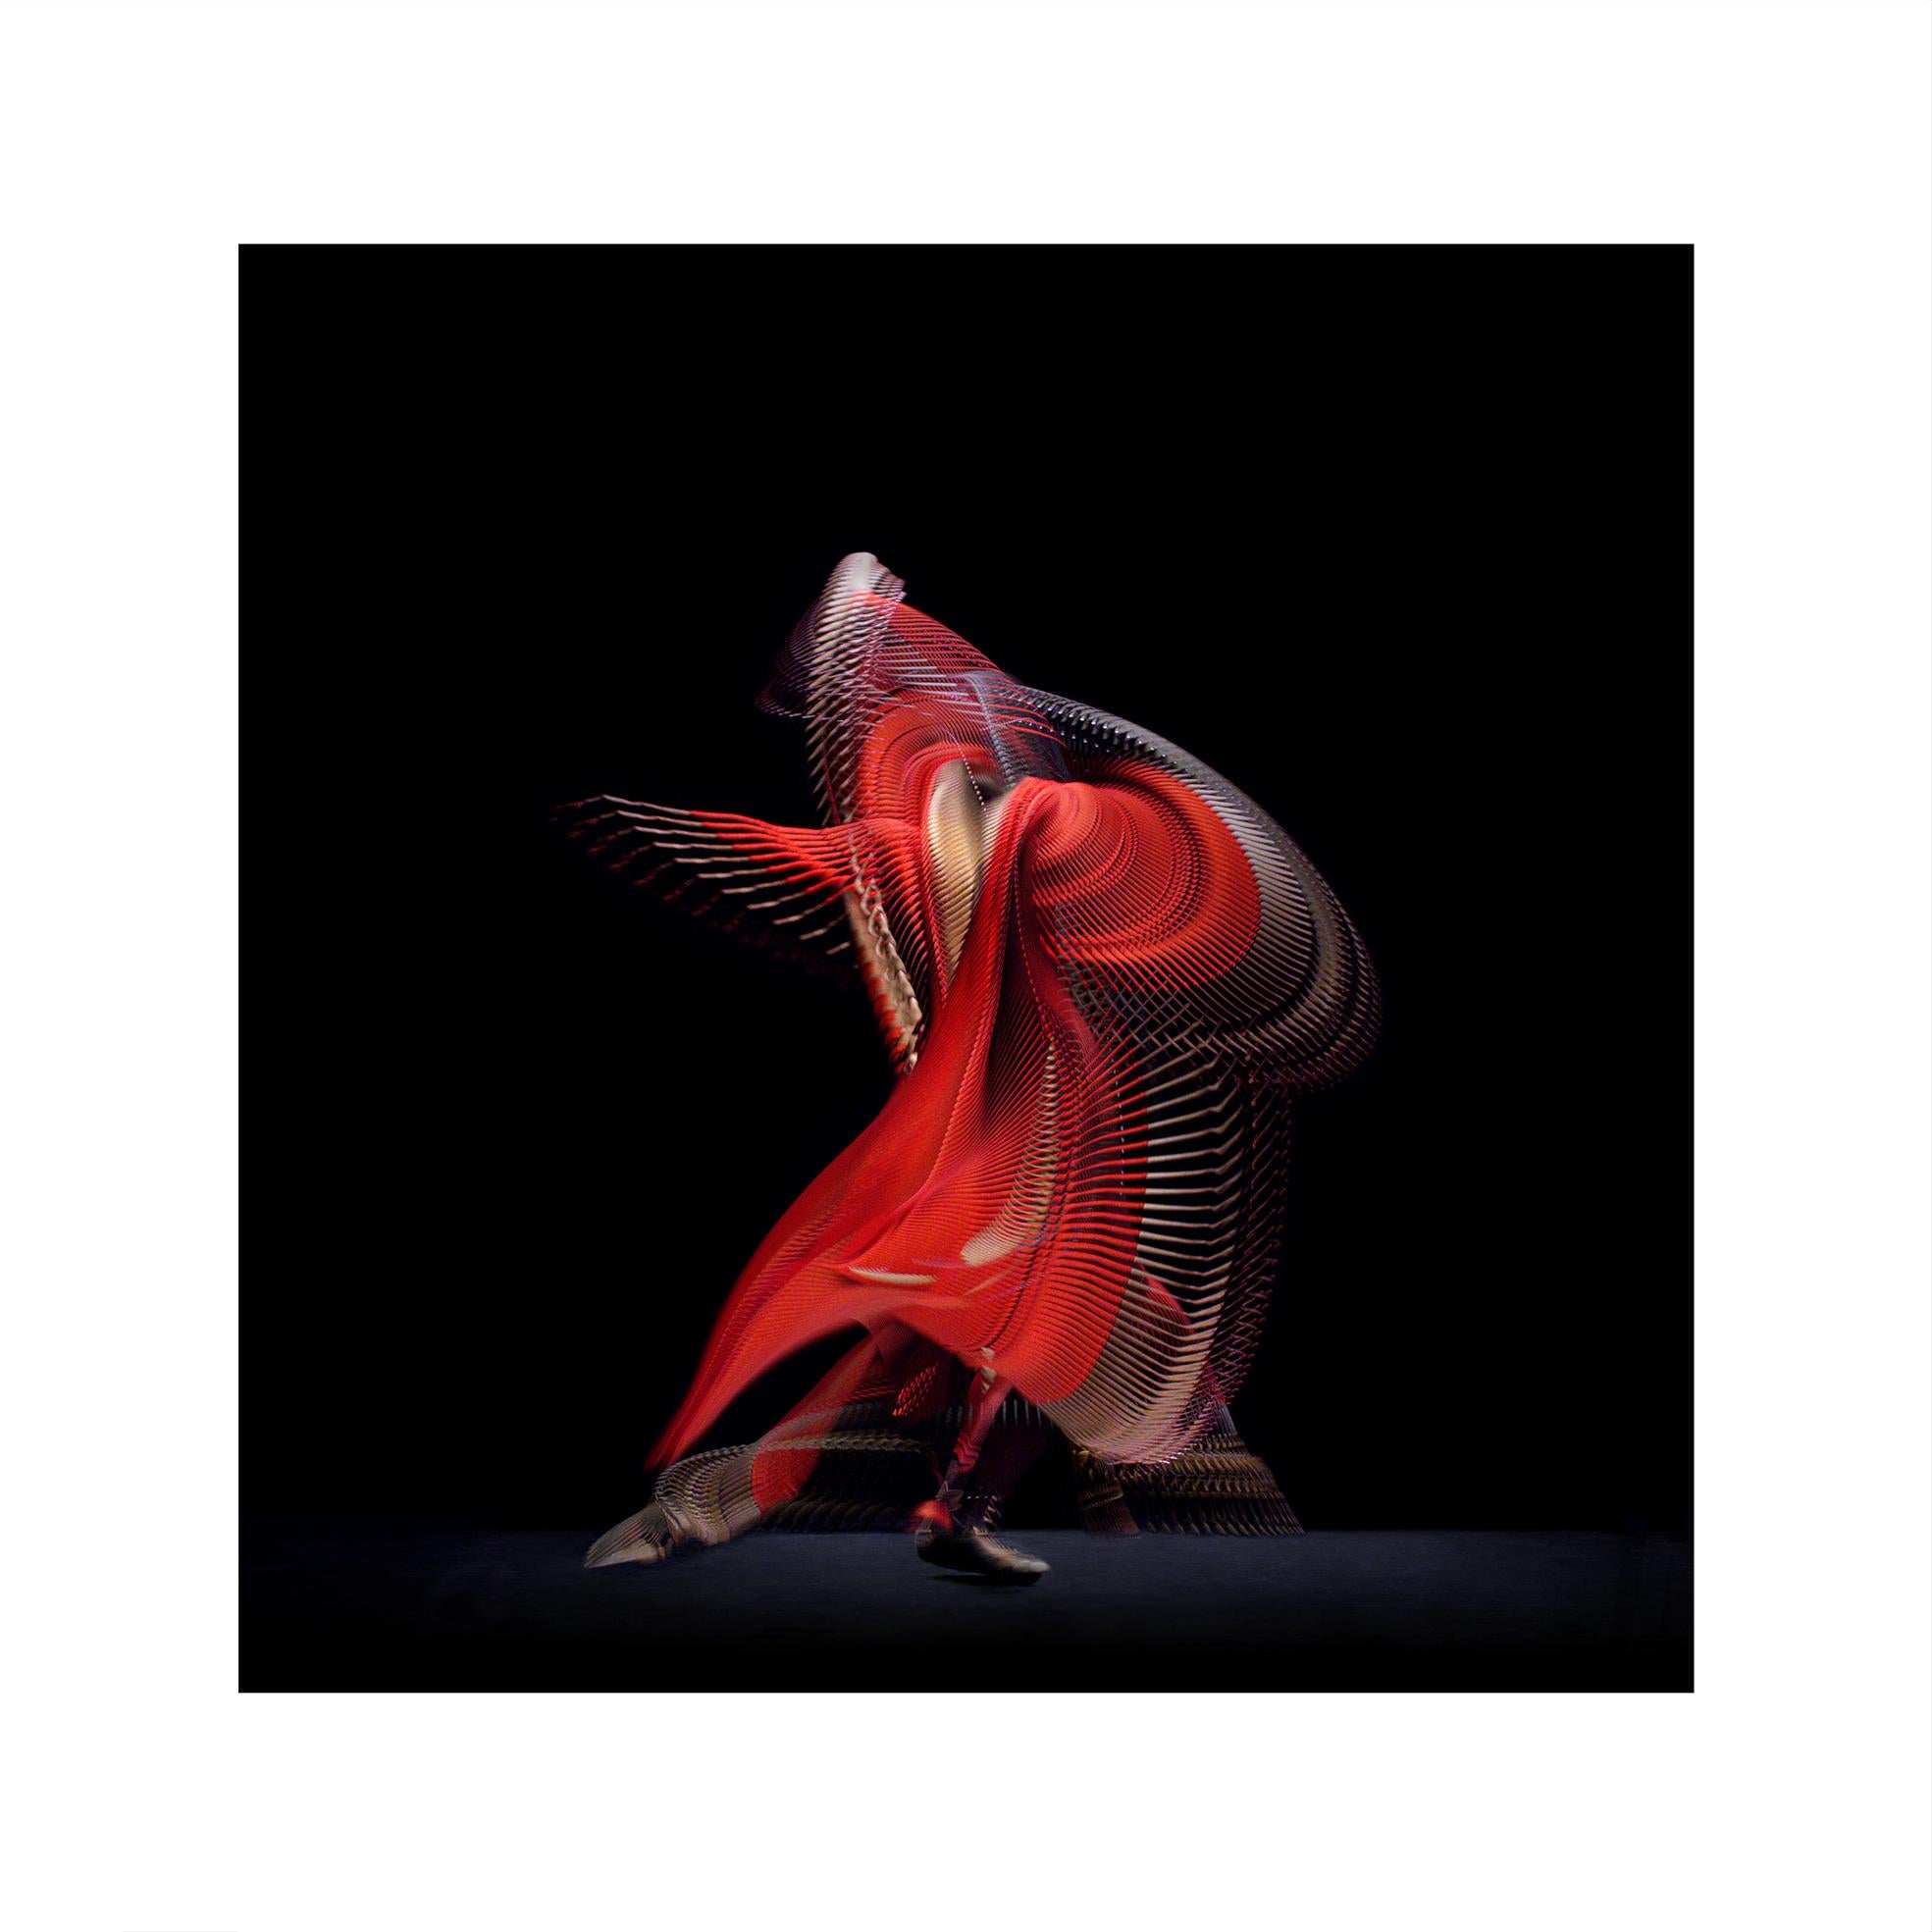 Giles Revell      Portrait Photograph - Abstract Dancers, Red 3, 2019 by Giles Revell - Photography, Print, Ballet